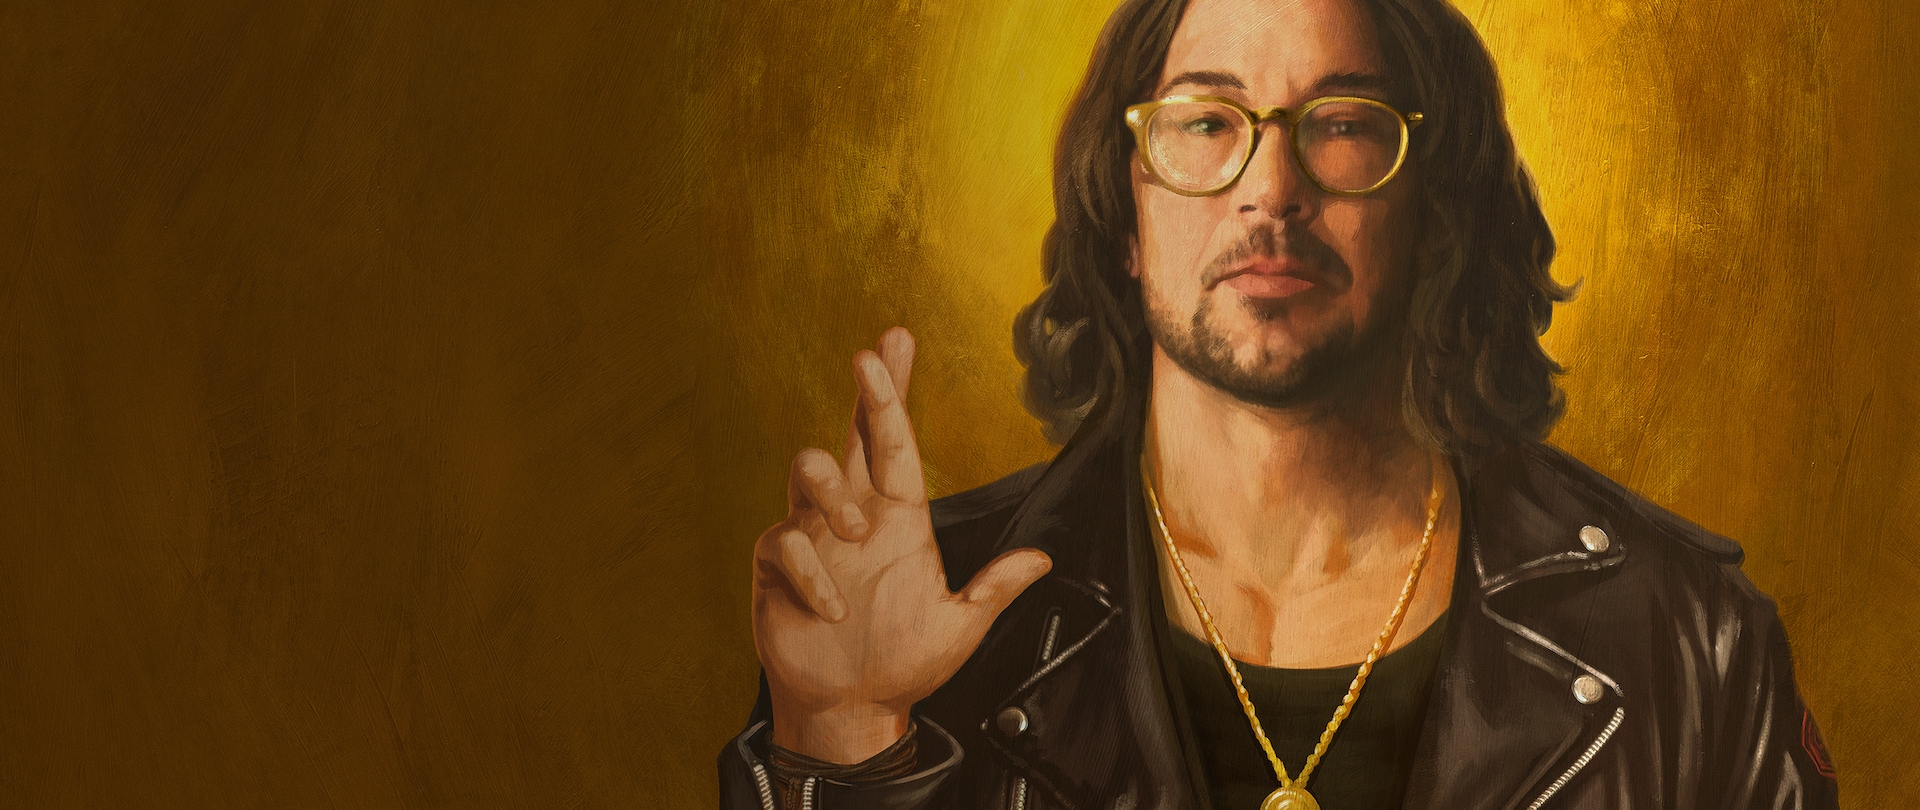 Pastor Carl Lentz with long wavy hair in a black leather jacket and gold chain with right hand raised with fingers crossed.